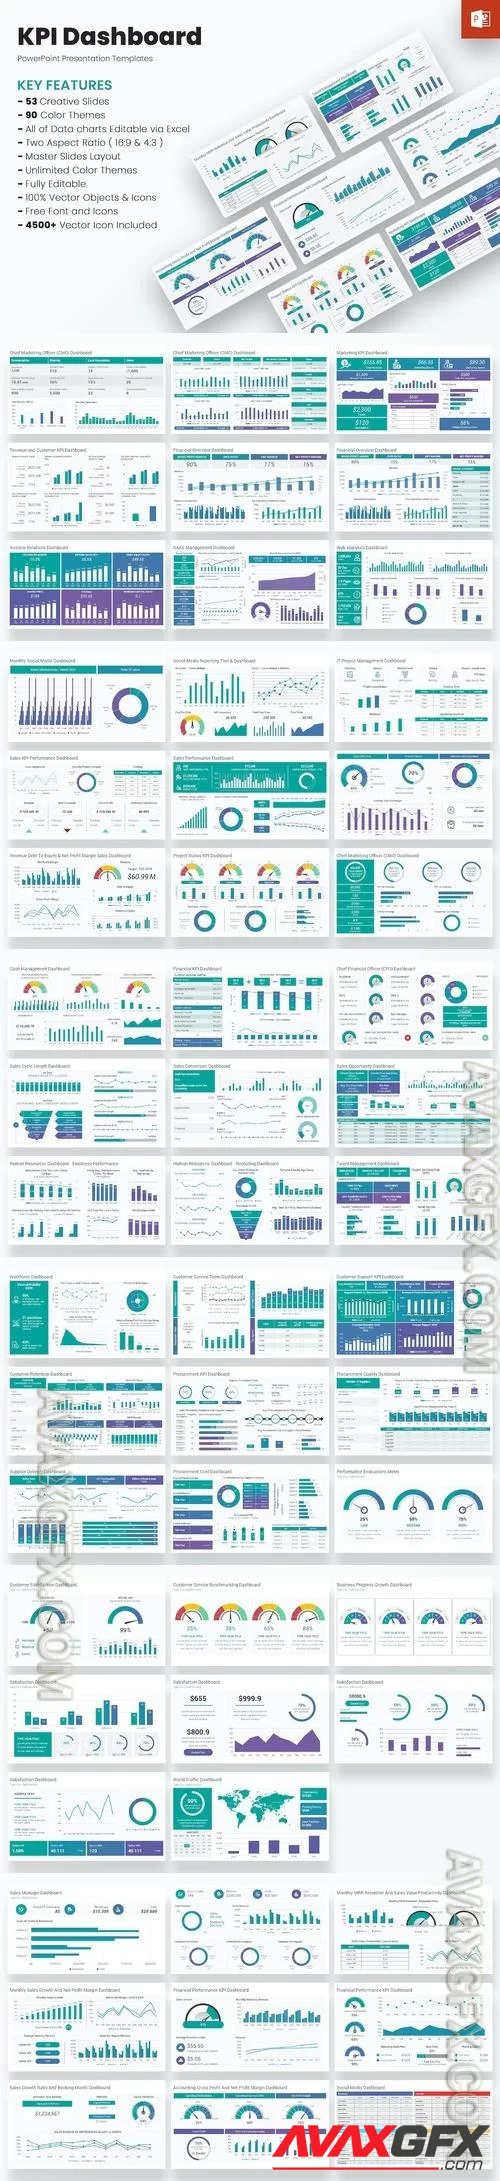 KPI Dashboard PowerPoint and Keynote Templates